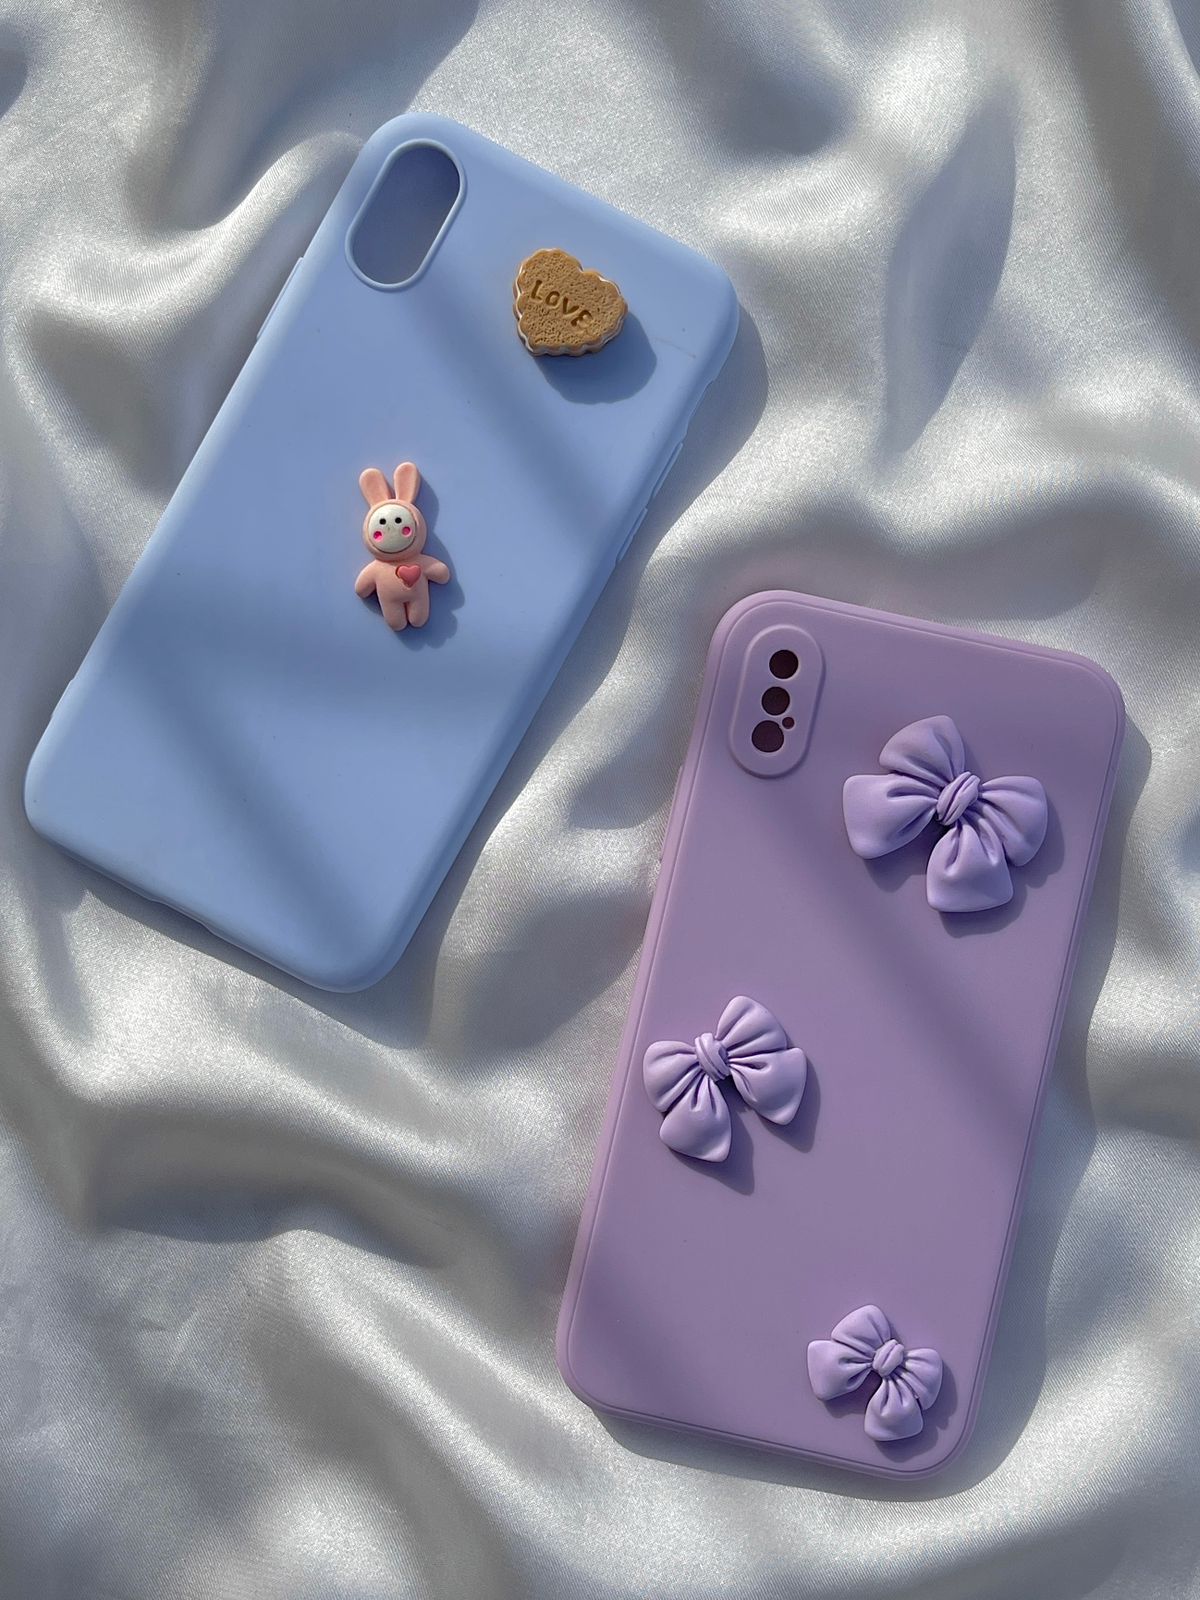 iPhone "X/XS" Silicone Case "3D" Edition